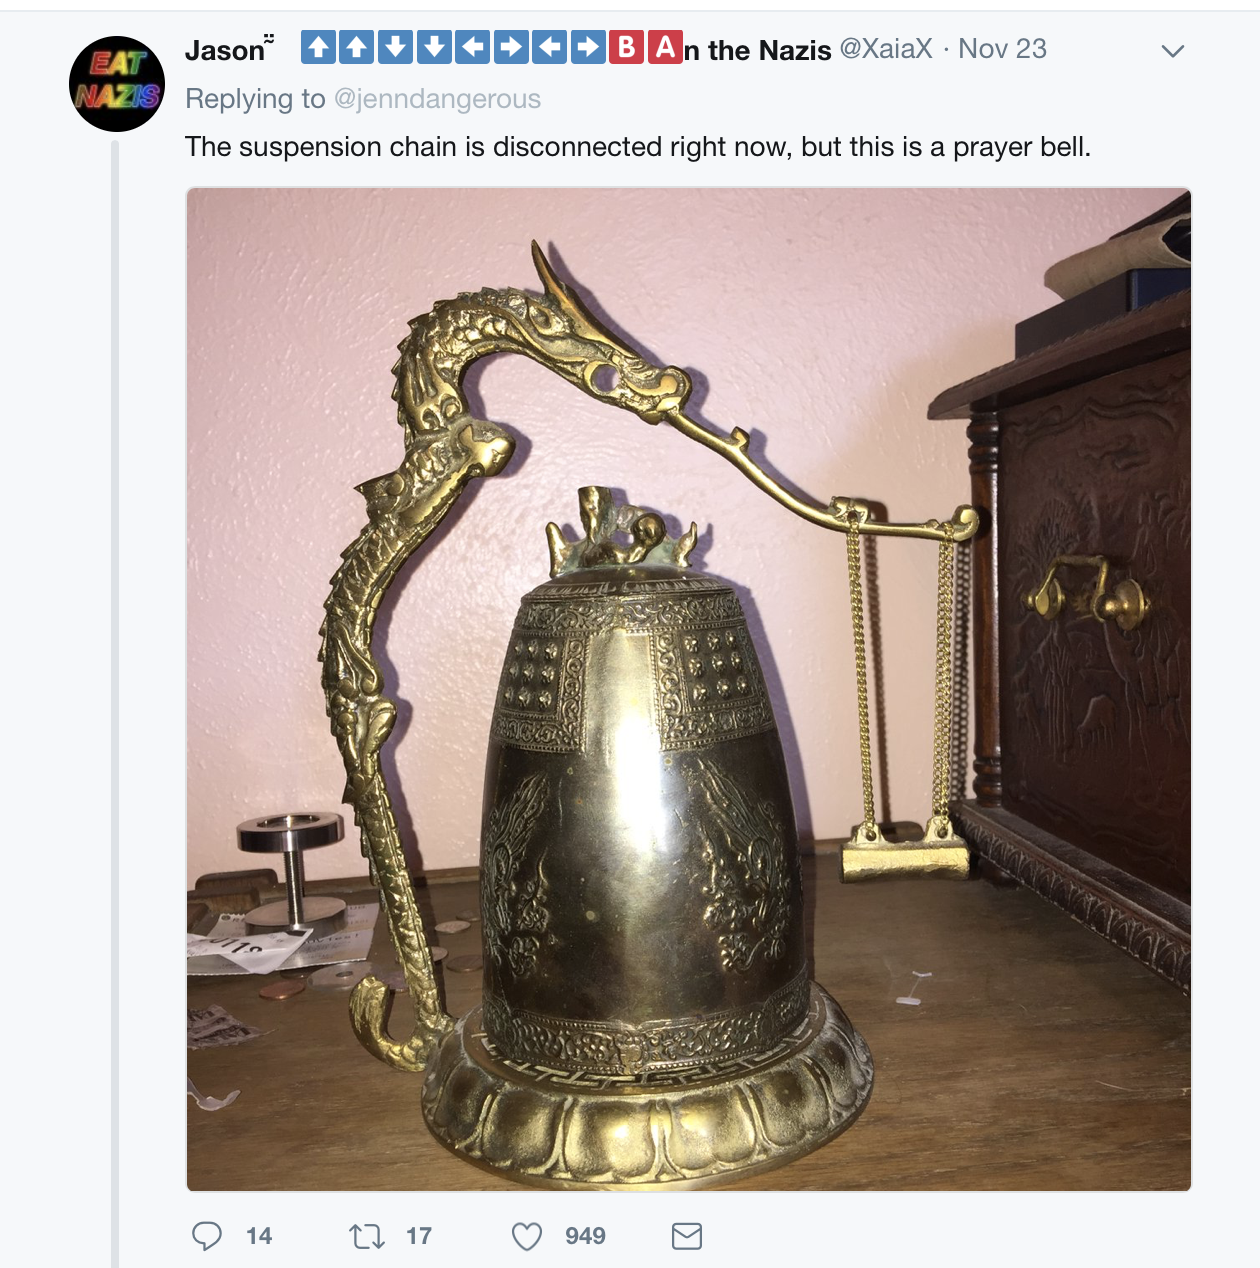 ghanta - Jason O Do B An the Nazis axalax. Nov 23 The suspension chain is disconnected right now, but this is a prayer bell. 14 7 17 9499